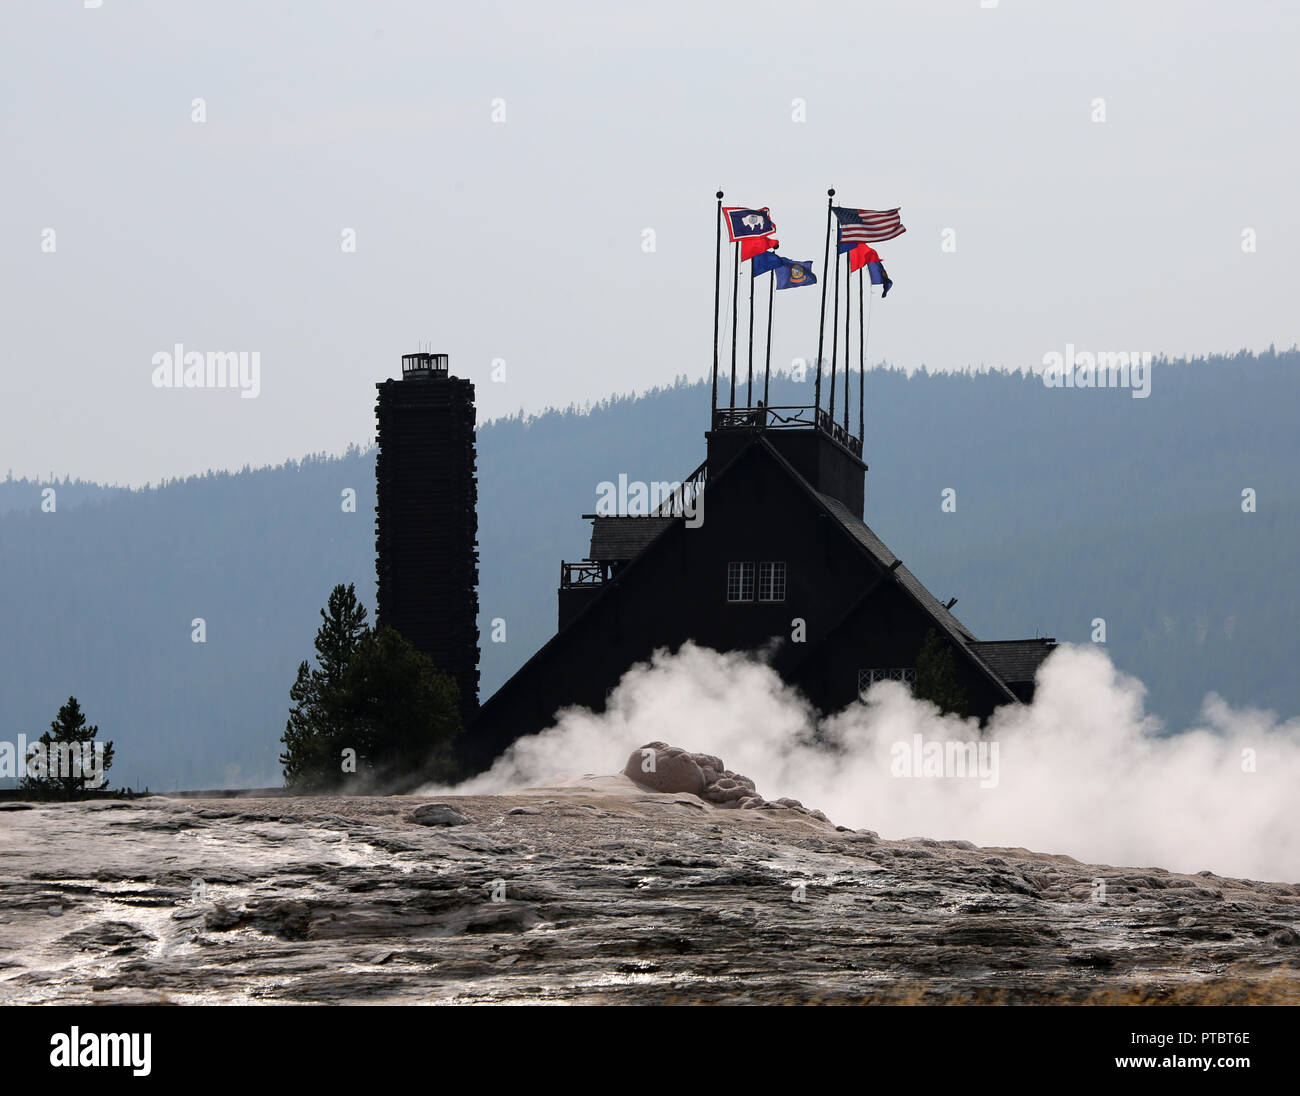 Old Faithfull Lodge with flying flags and steam from geyser in foreground Stock Photo